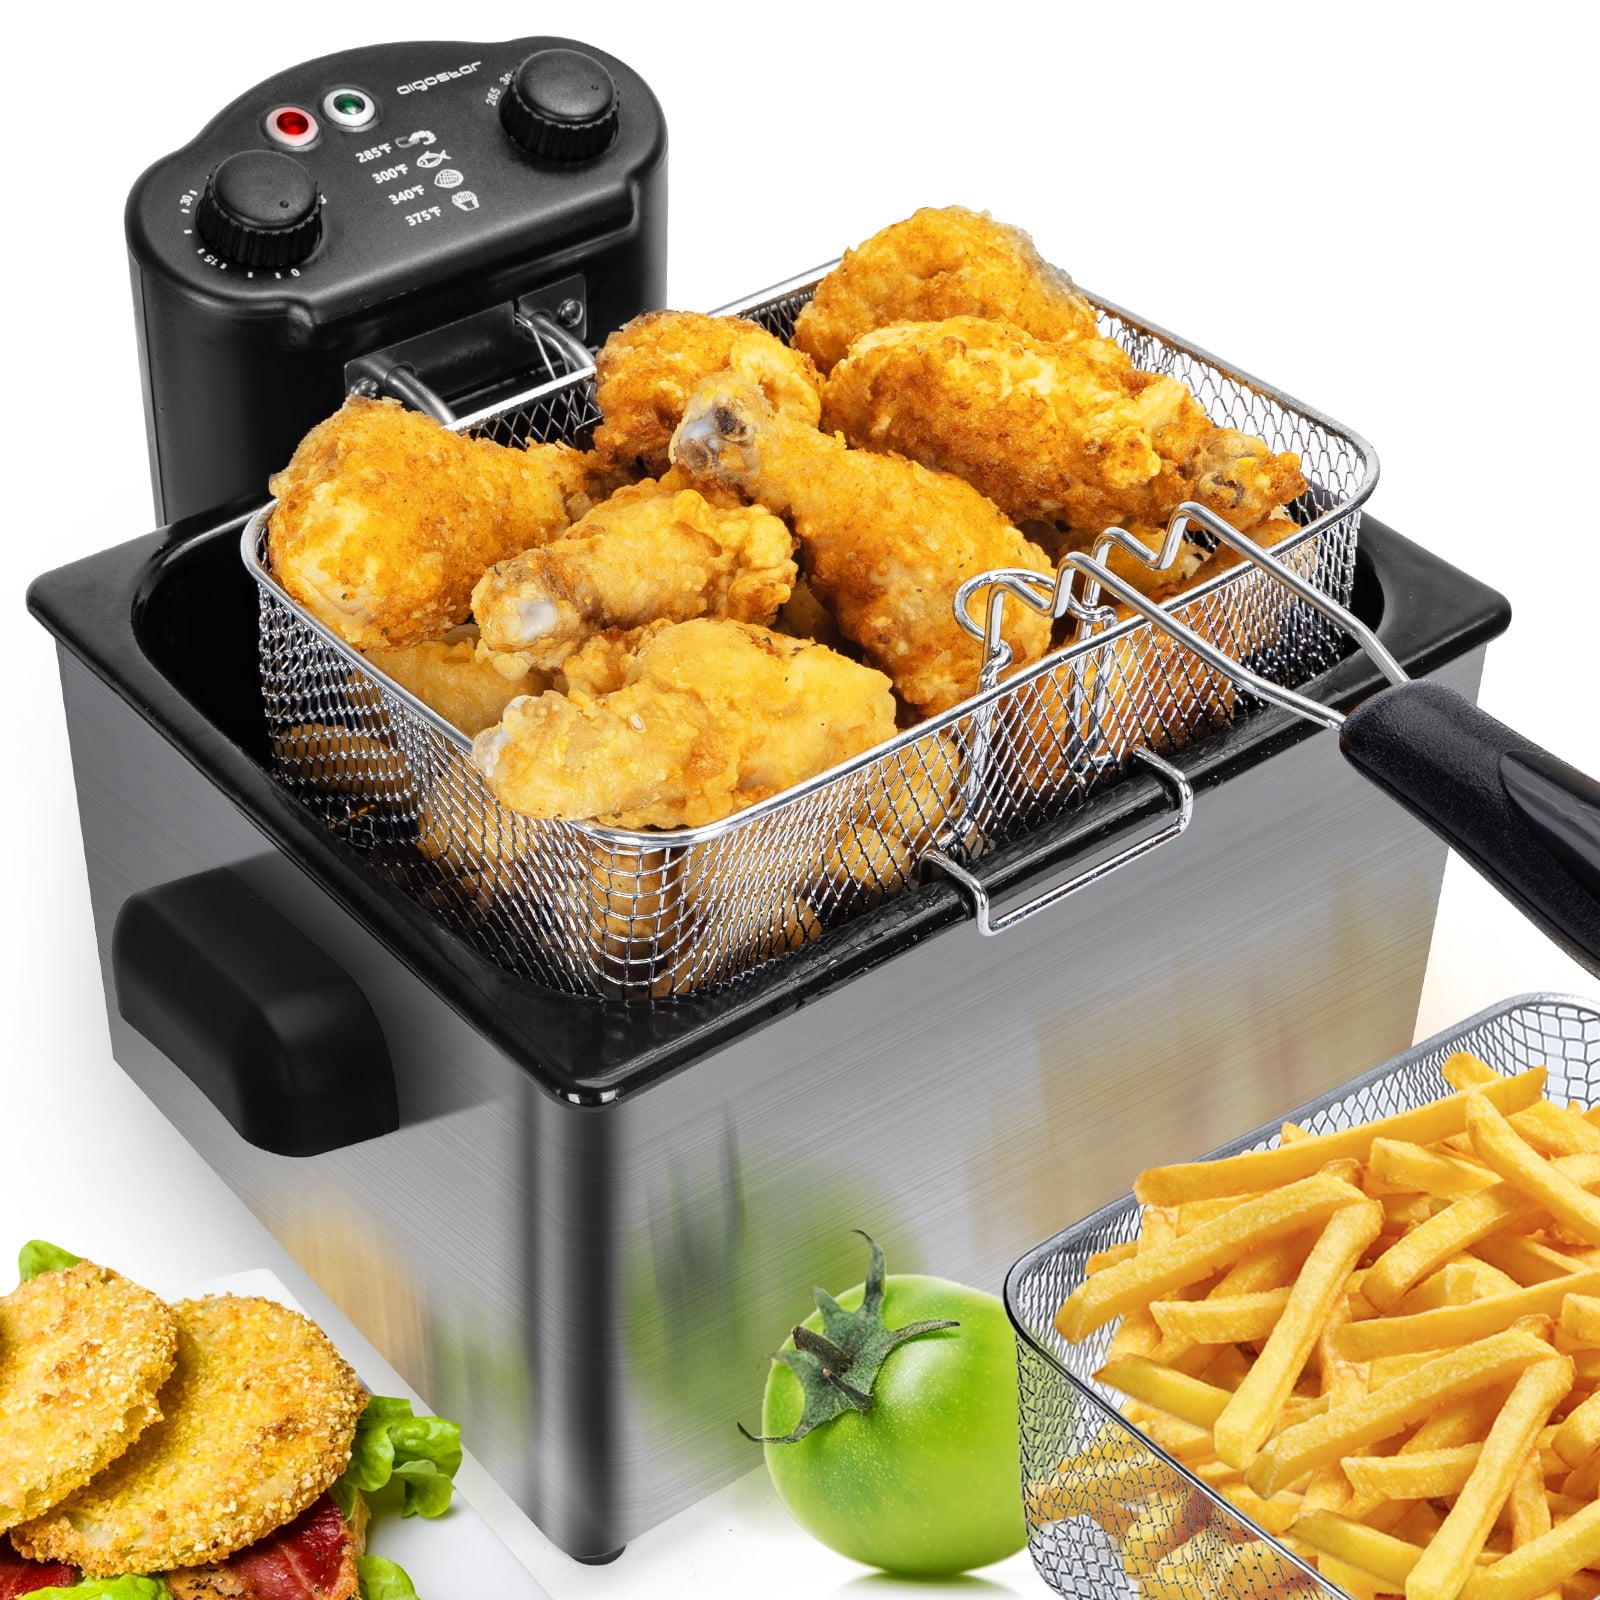 ARLIME Deep Fryer with Basket, 3.2 Qt/3L Electric Fryer with Adjustable Temperature & Timer, Removable Oil-Container & Lid w/View Window, Stainless